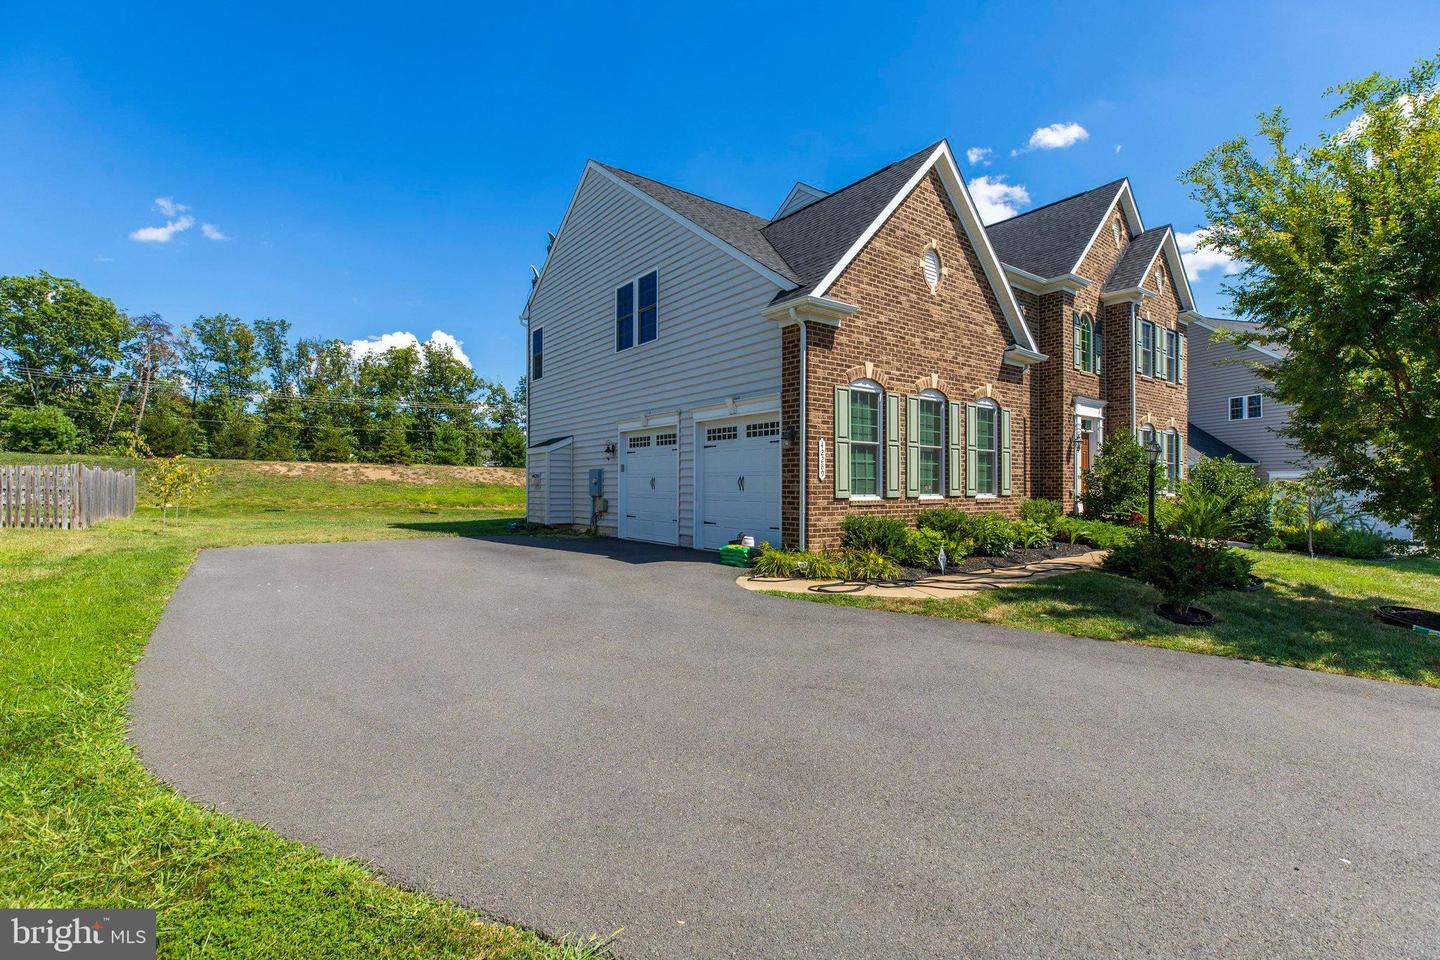 VALO2067588-802953000500-2024-04-13-00-11-50  |   | Chantilly Delaware Real Estate For Sale | MLS# Valo2067588  - Best of Northern Virginia